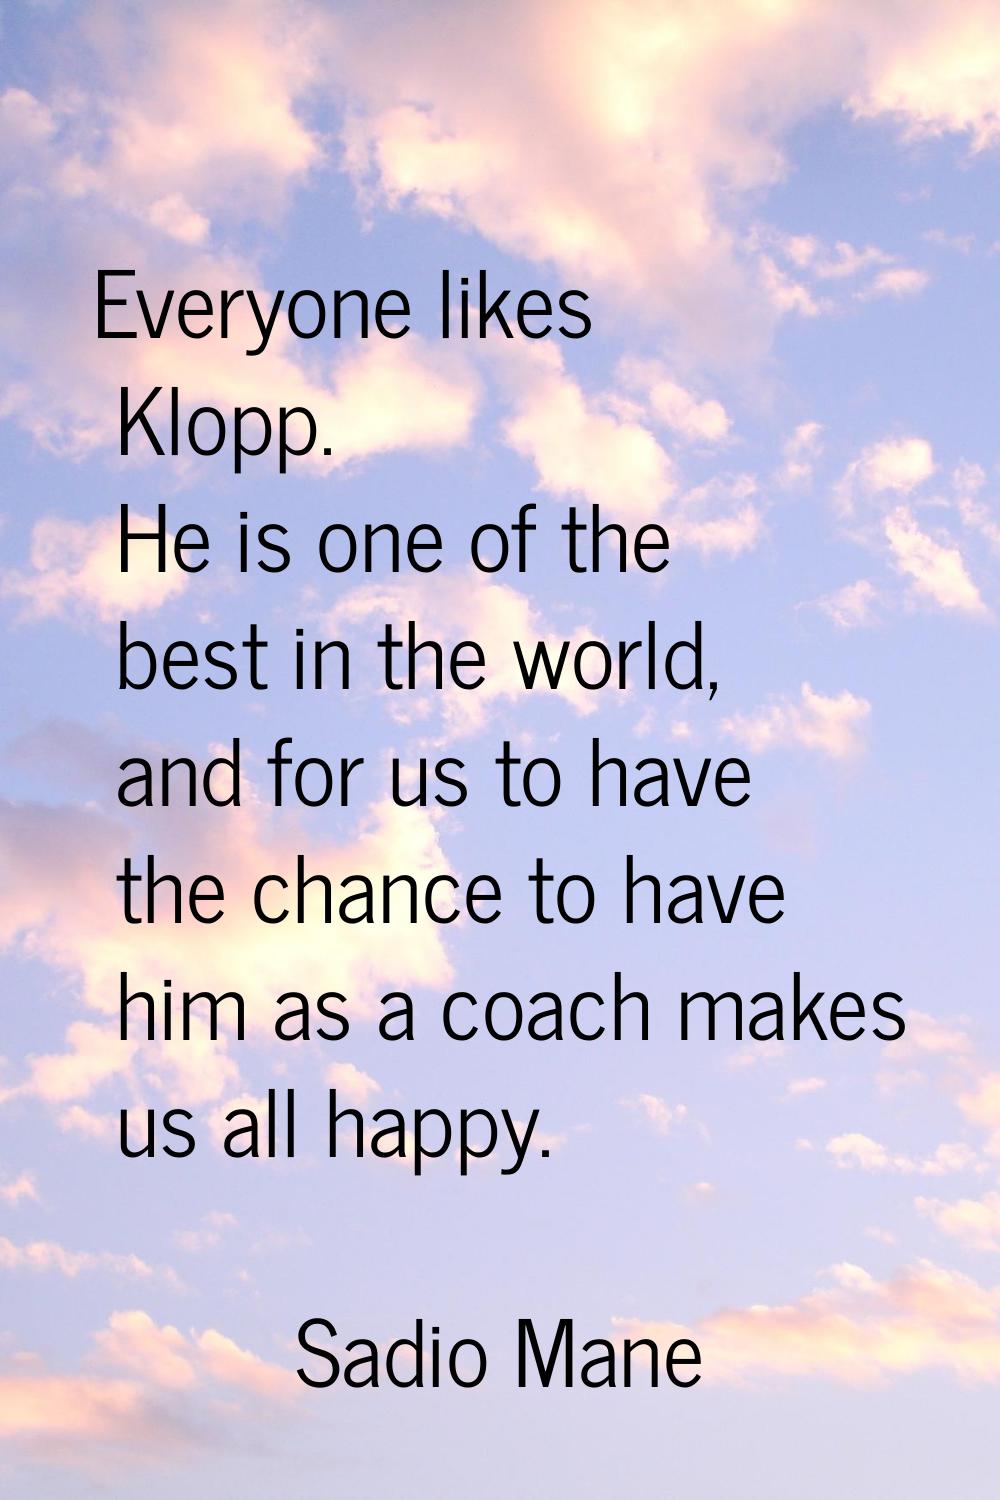 Everyone likes Klopp. He is one of the best in the world, and for us to have the chance to have him